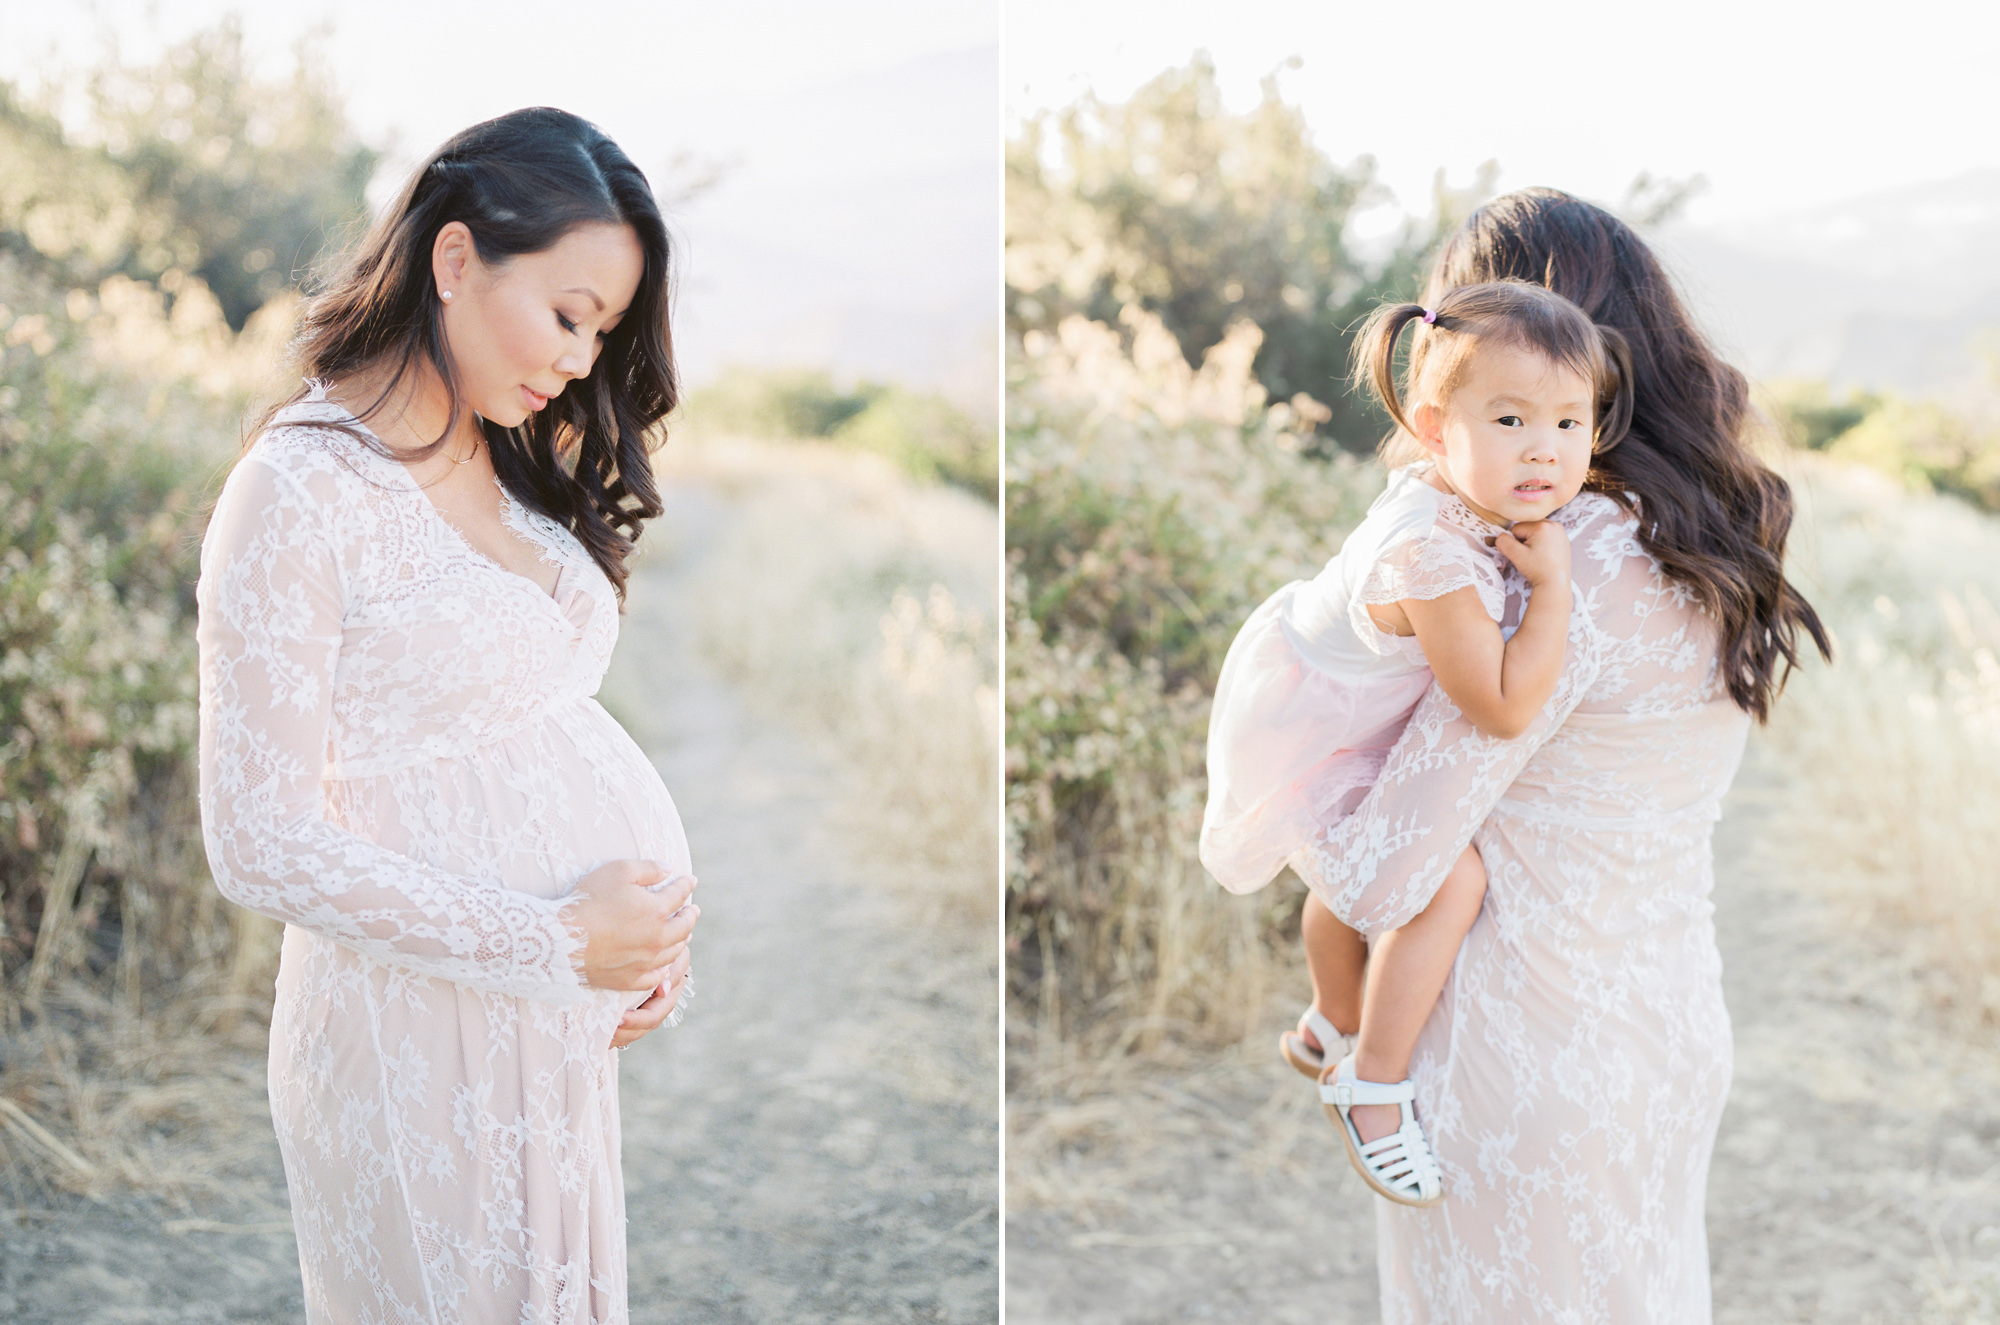 Maternity photography in Dallas by award-winning fine art photographer Tenth & Grace.